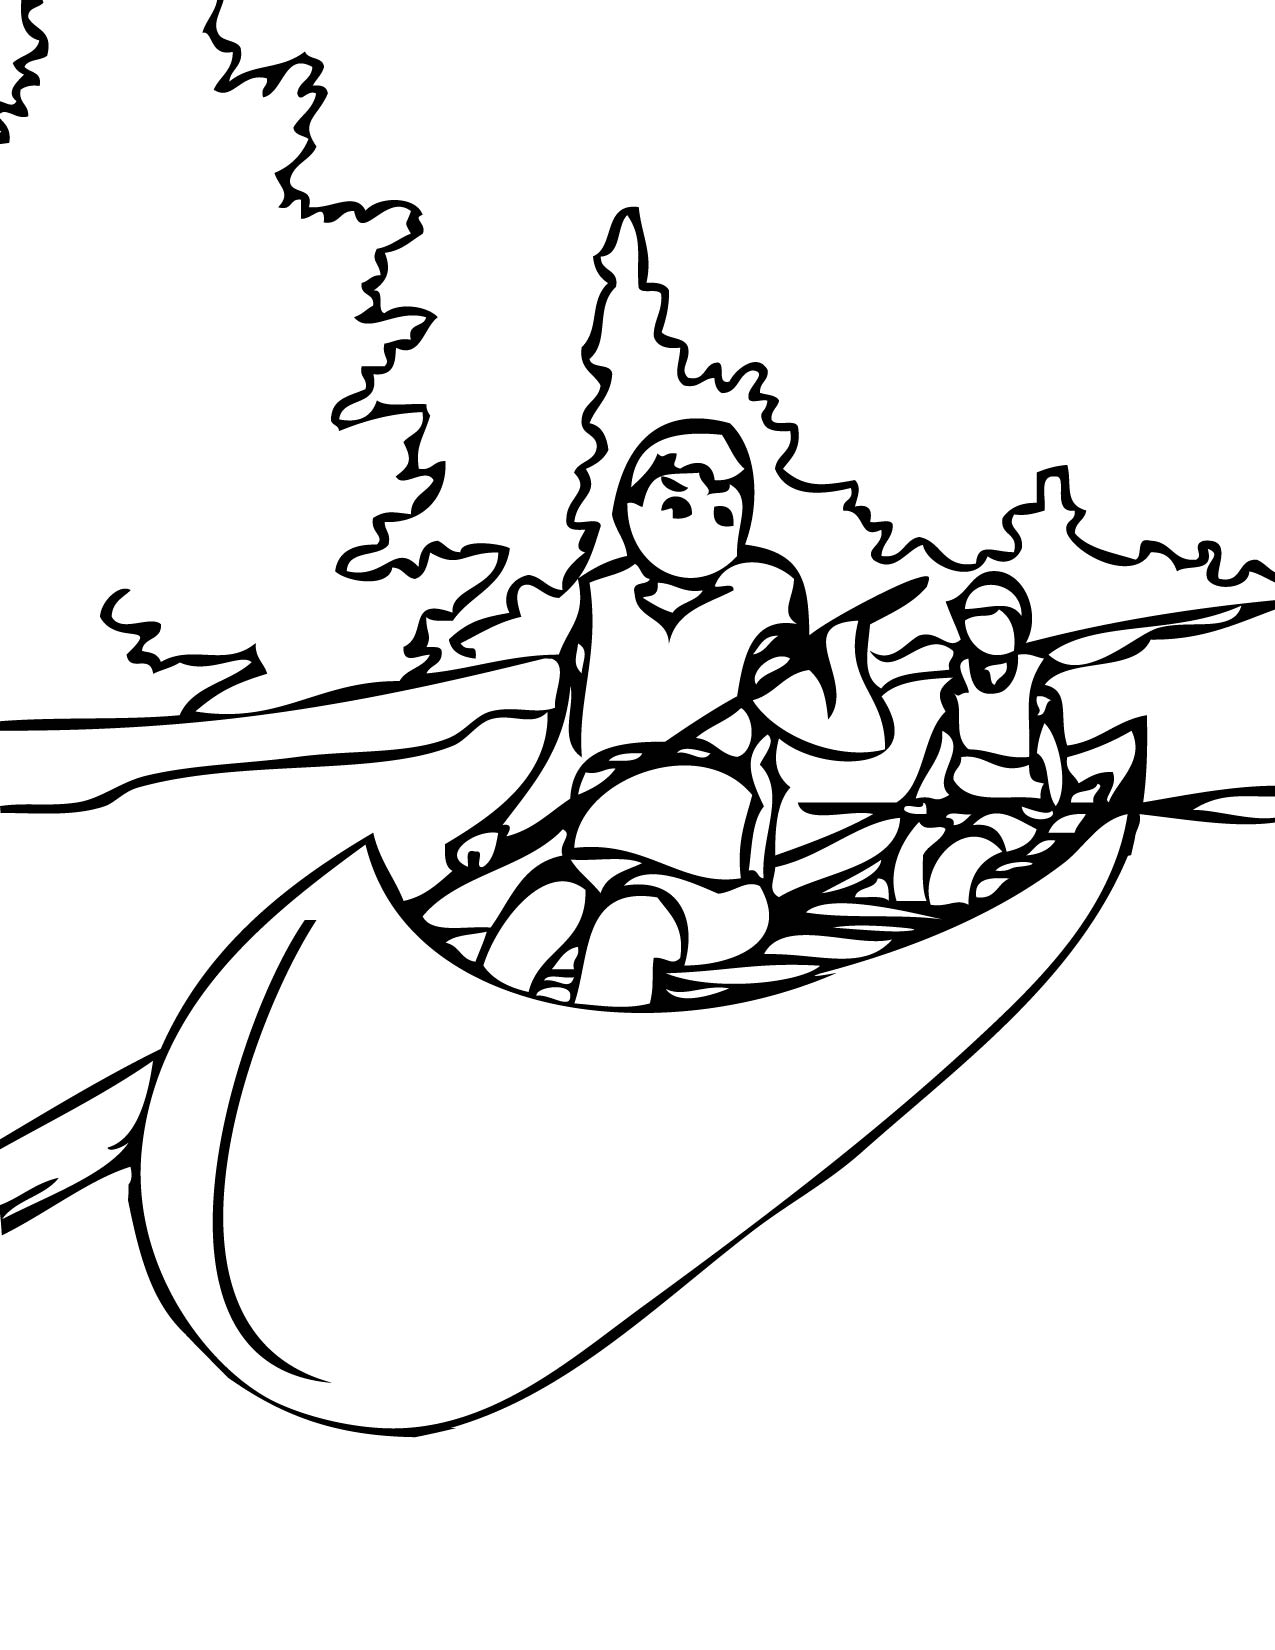 Canoe clipart coloring page, Canoe coloring page Transparent FREE for  download on WebStockReview 2020